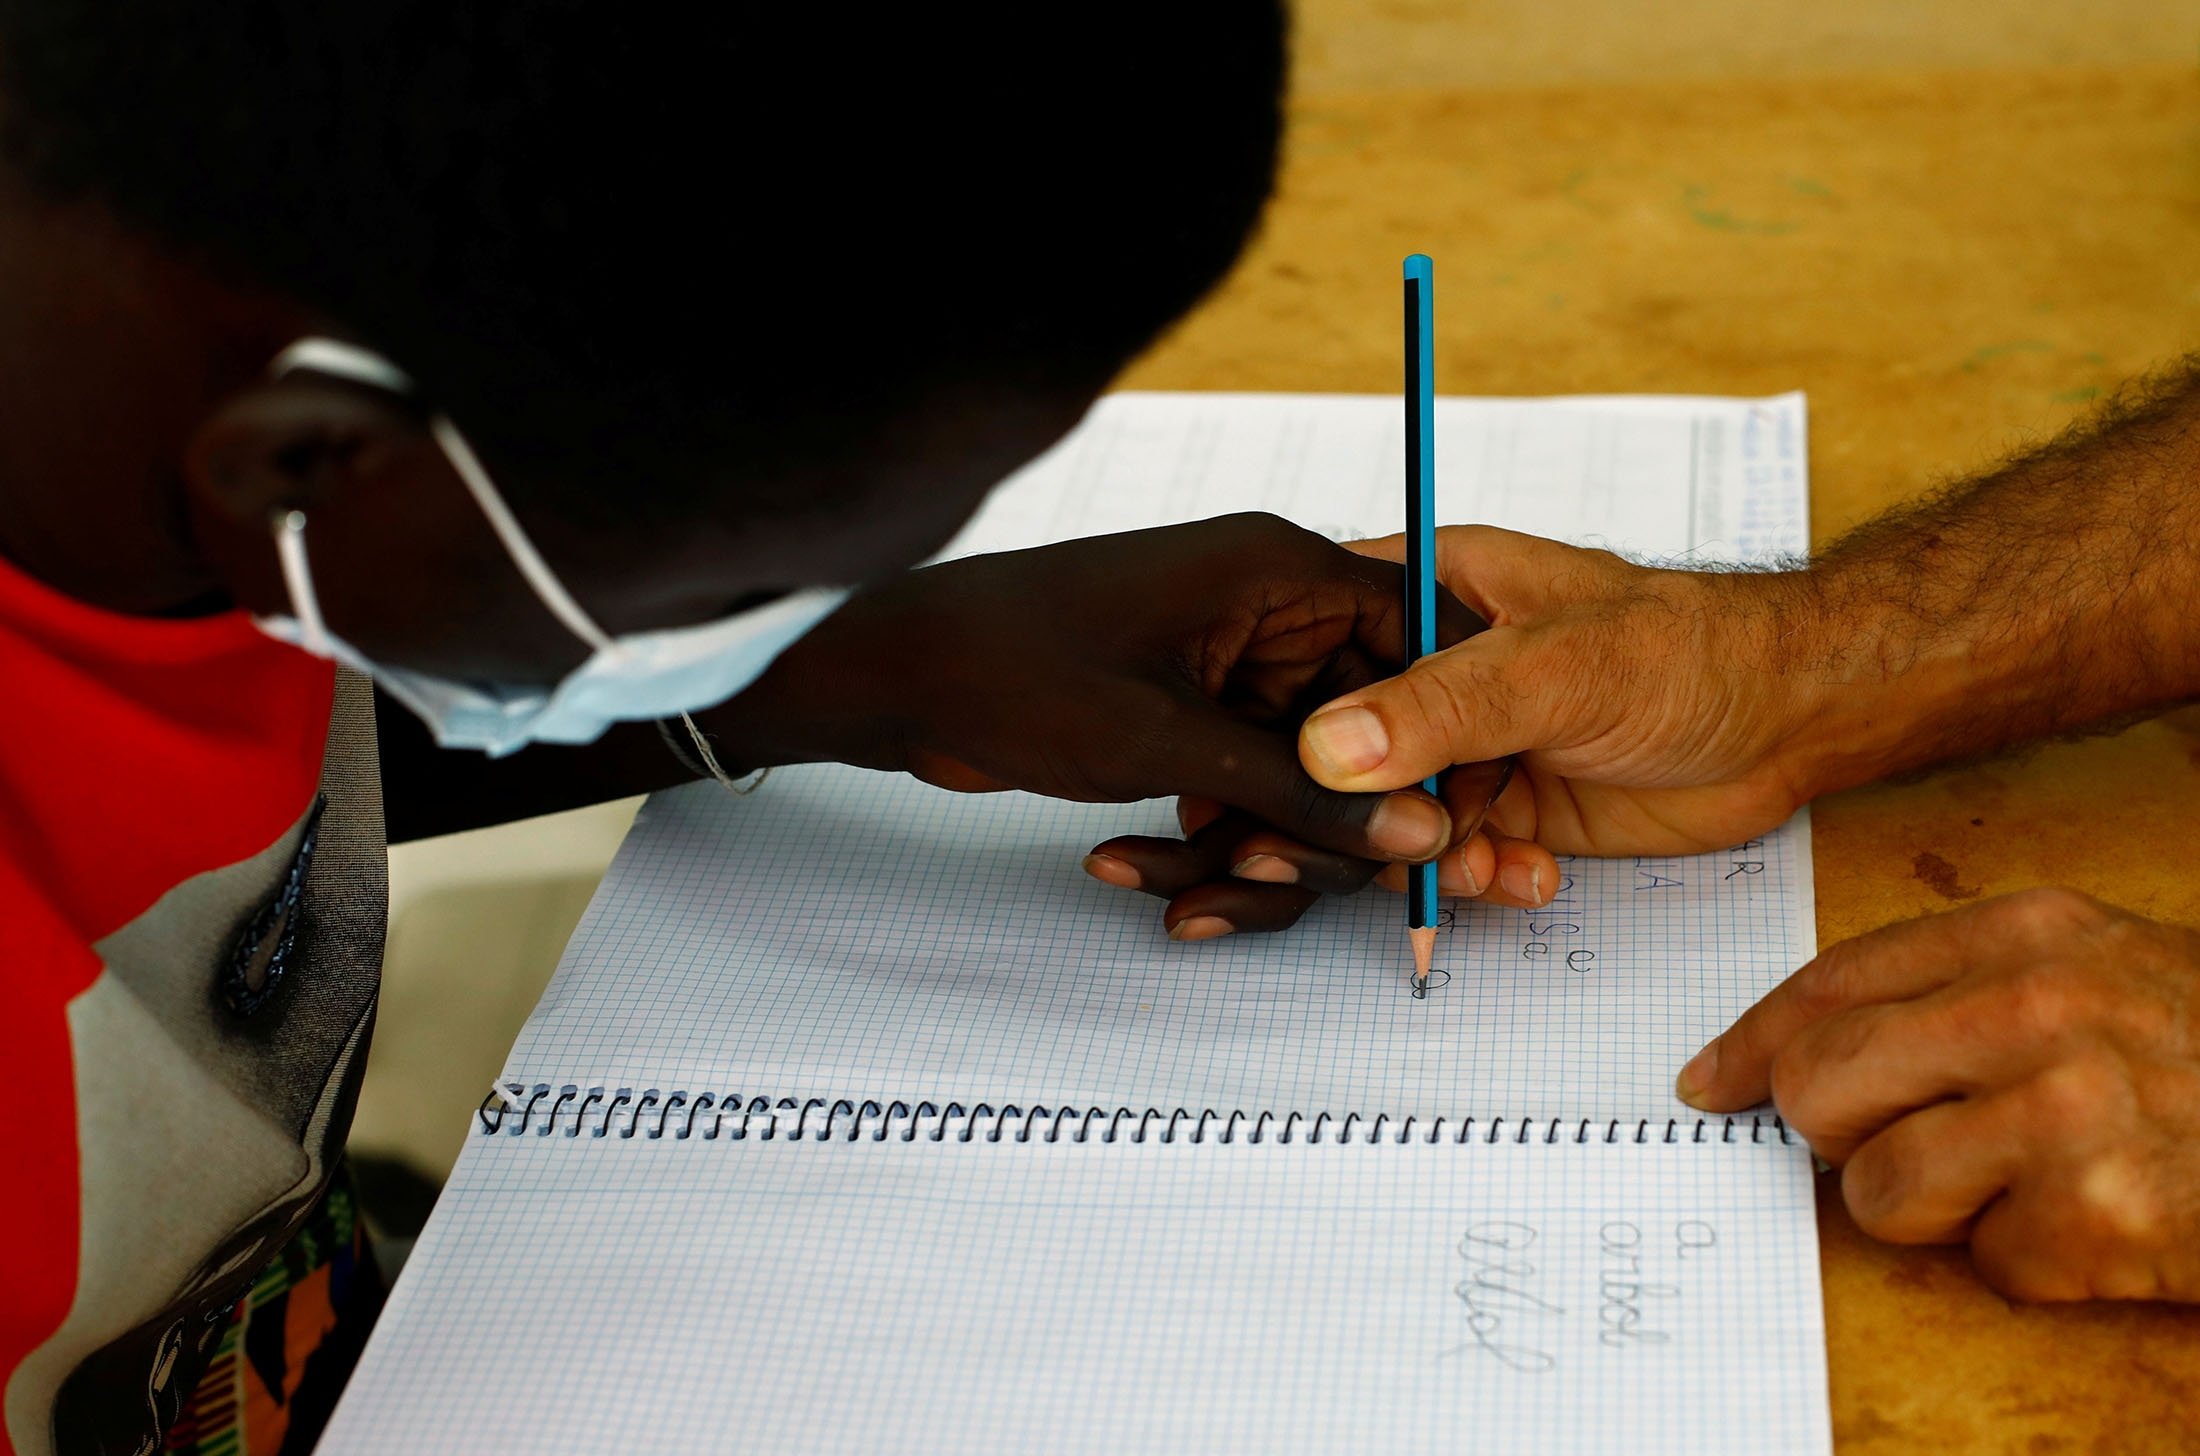 Tito Martin takes the hand of Mor Low (L), a migrant from Senegal, to teach him how to write letters in Spanish, in Las Palmas, on the island of Gran Canaria, Spain, July 21, 2021. (Reuters Photo)